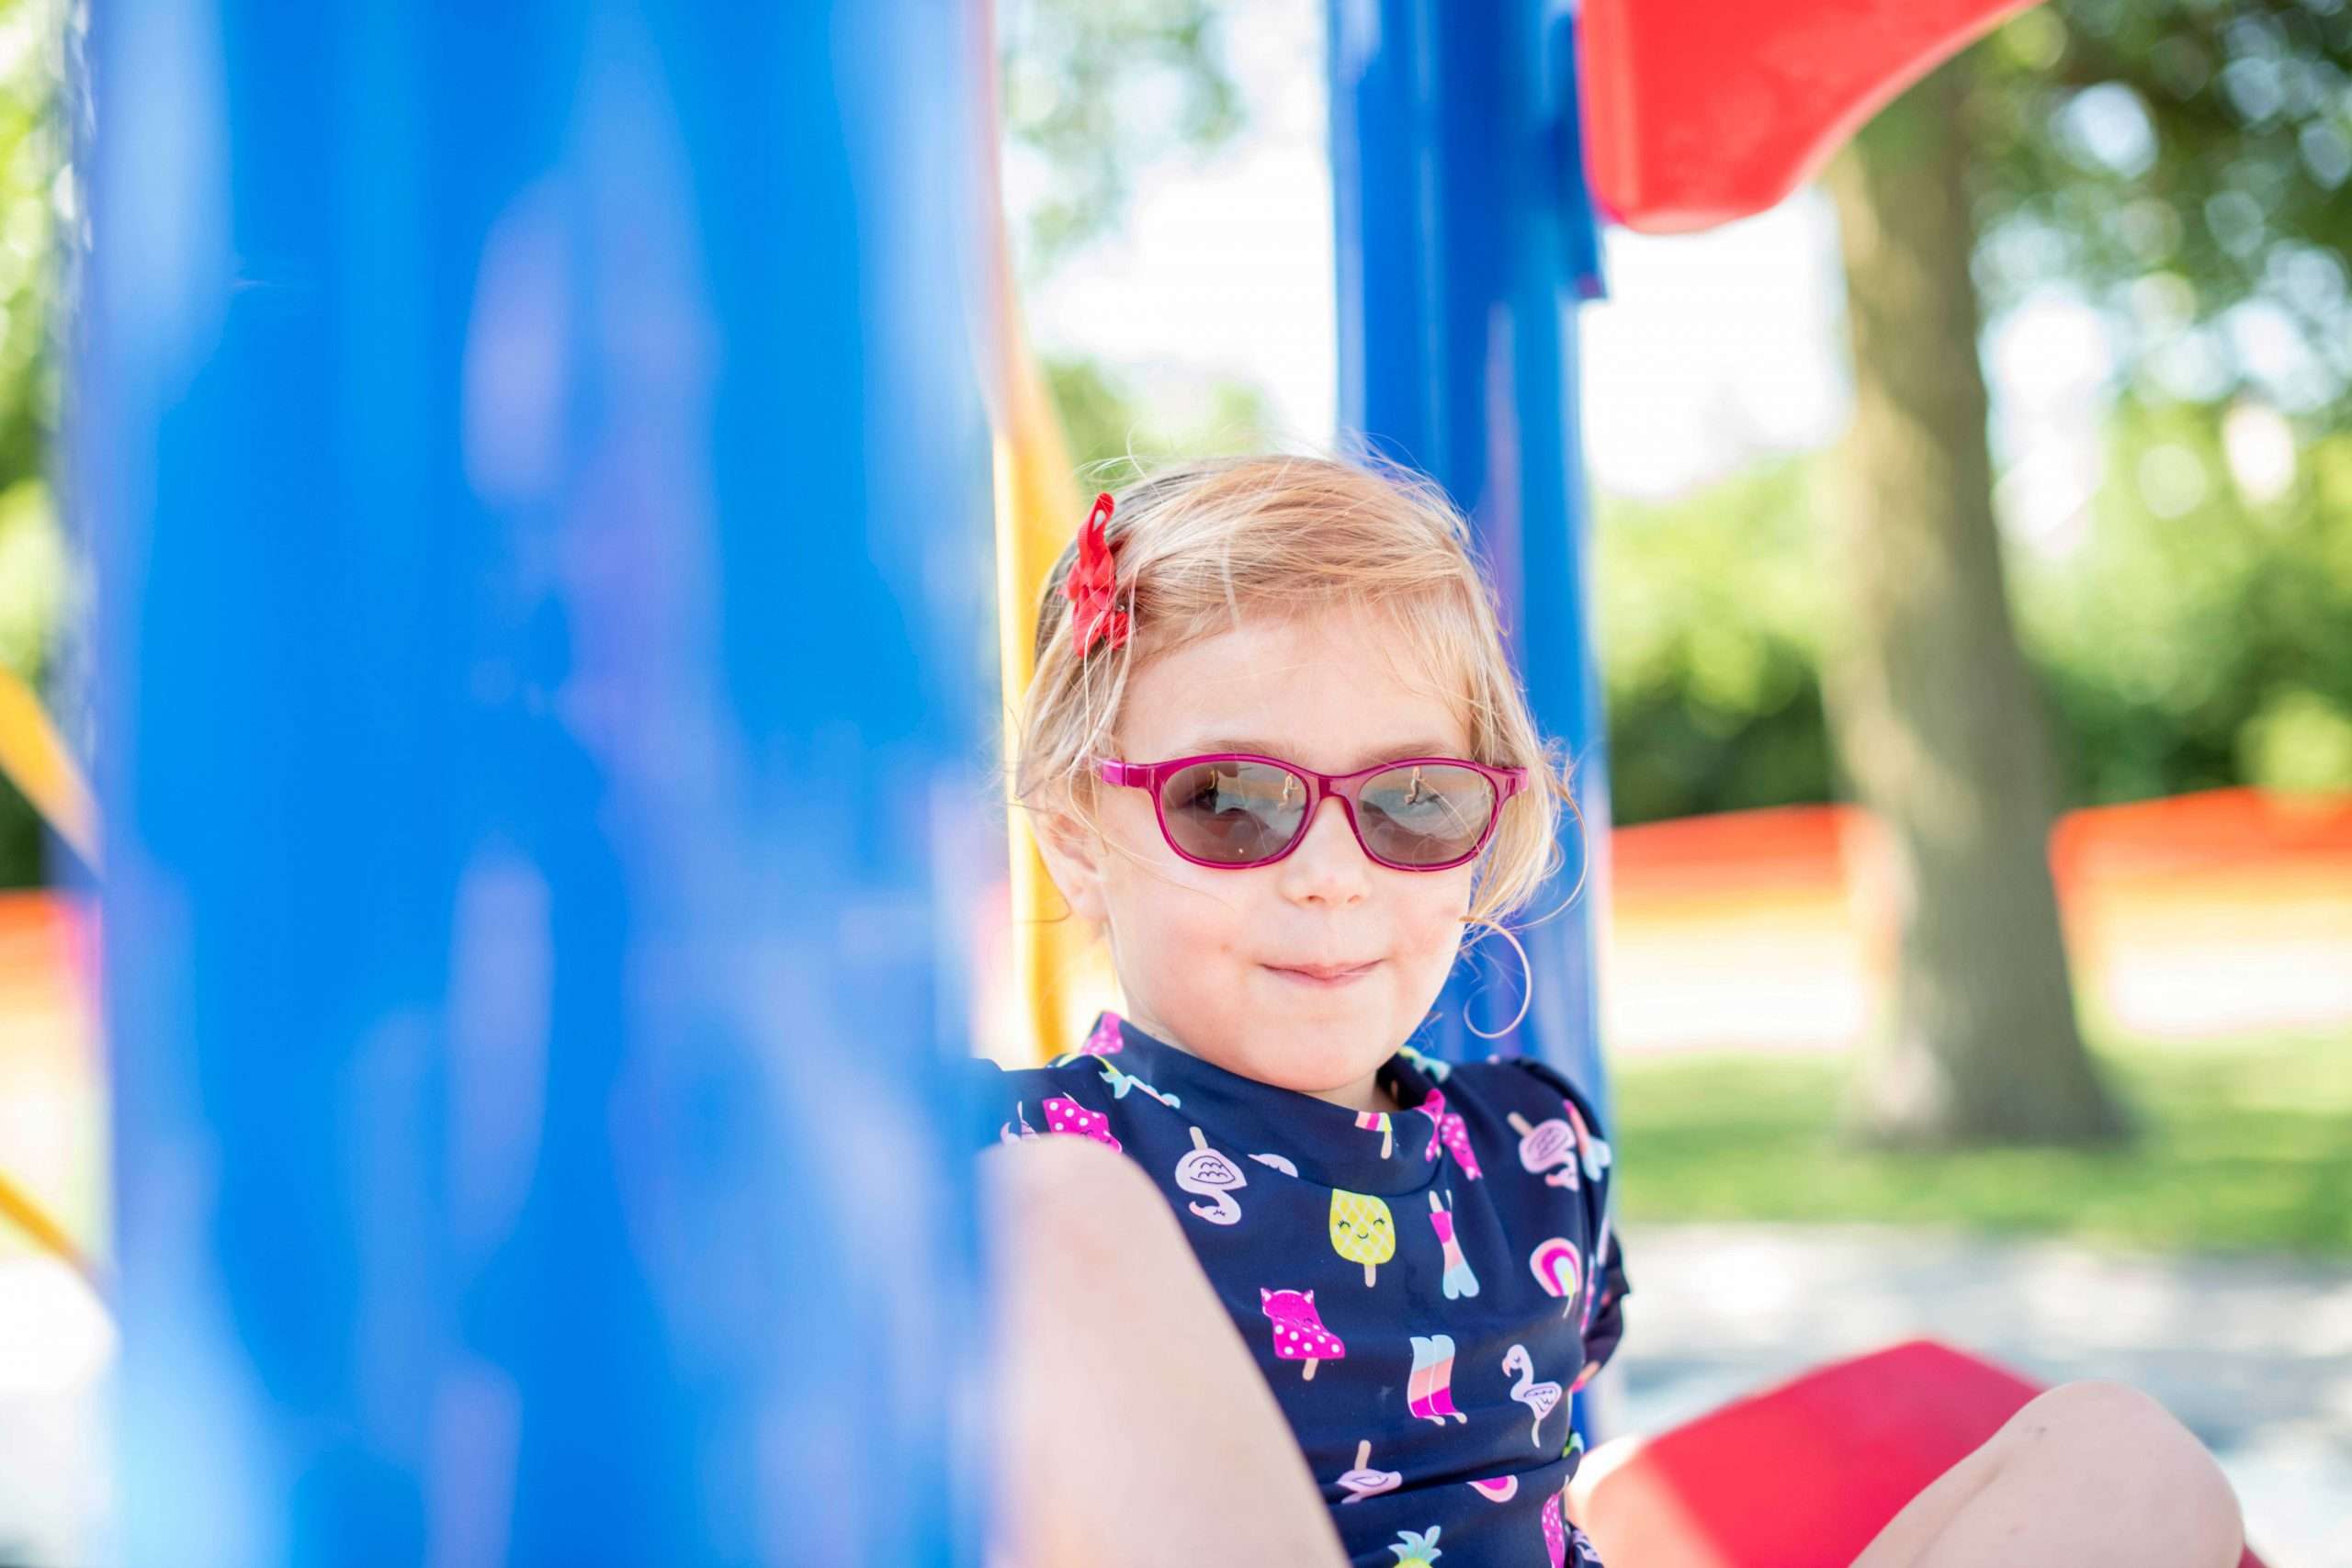 Child sitting on playground equipment. They are wearing pink sunglasses and looking directly at the camera with a smirk on their face.